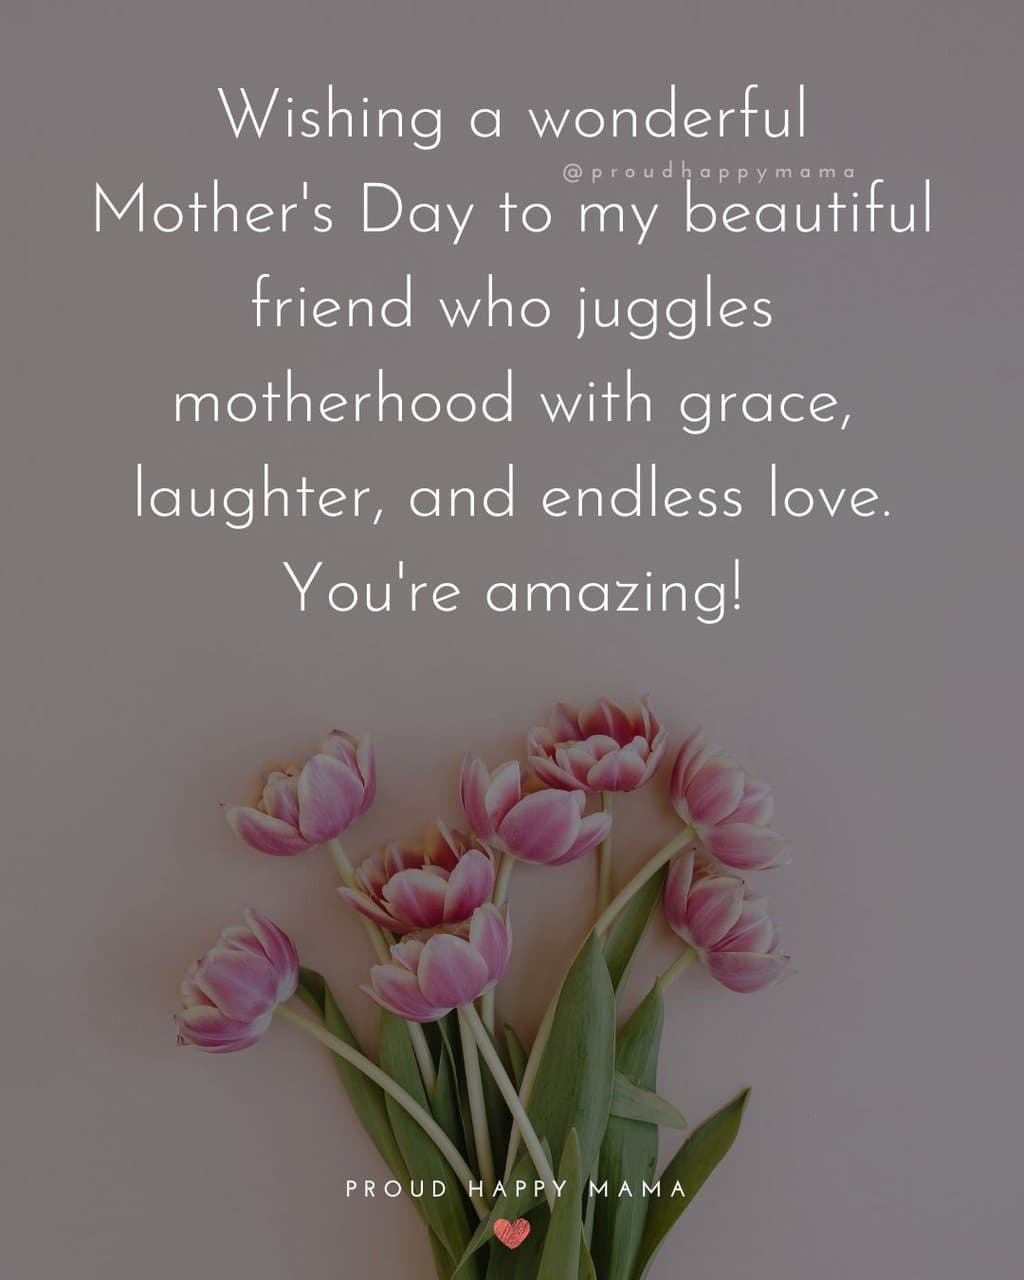 Best Mother's Day Quotes For Friends